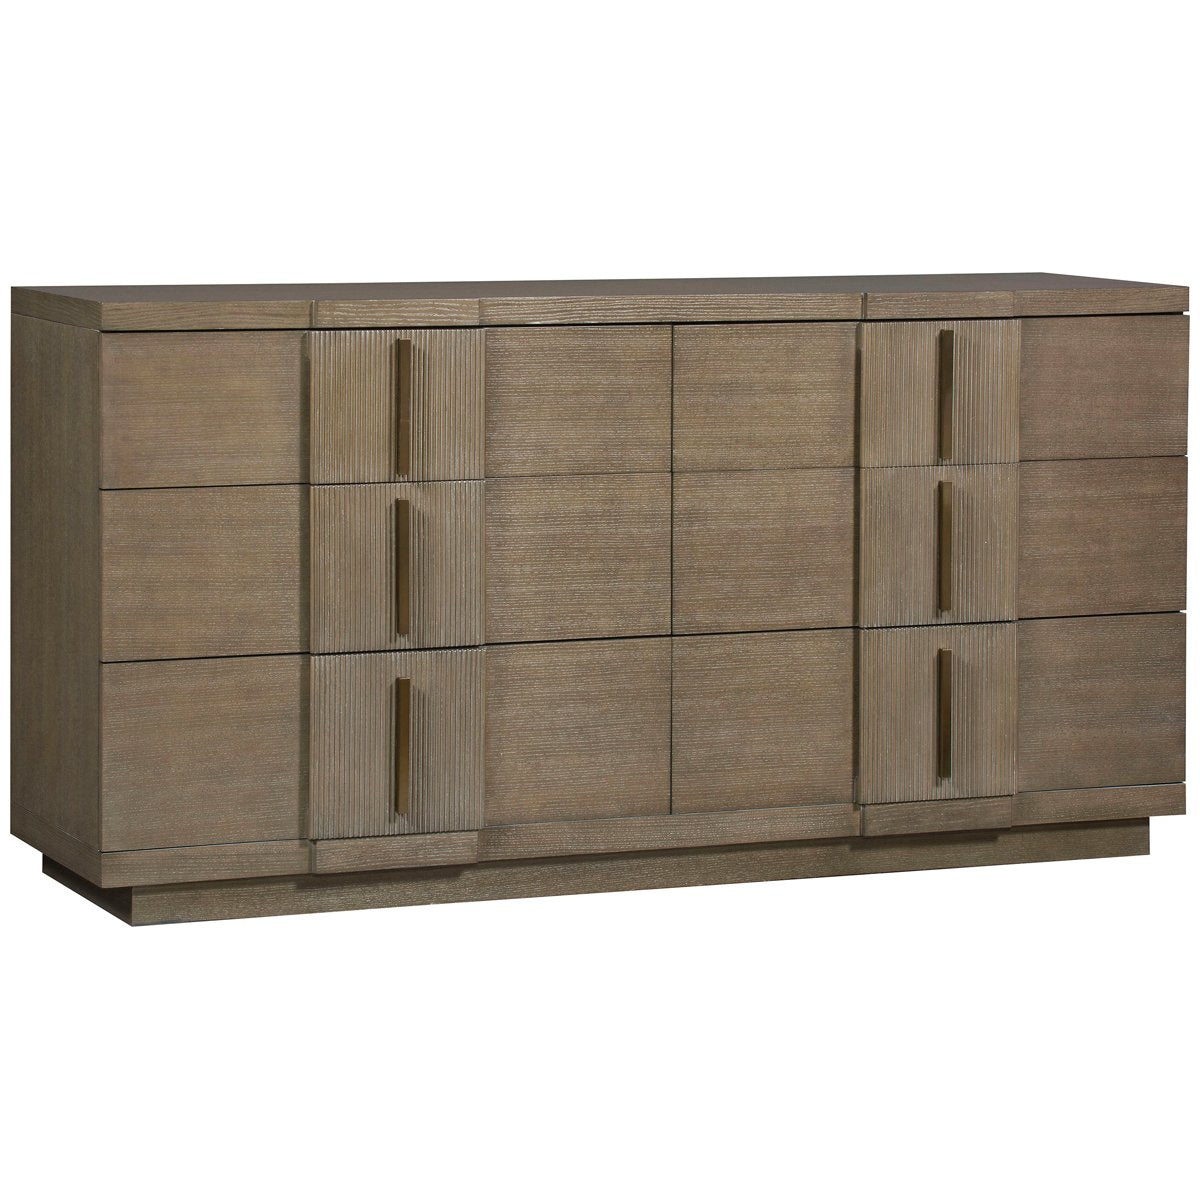 Vanguard Furniture Axis 6-Drawer Chest